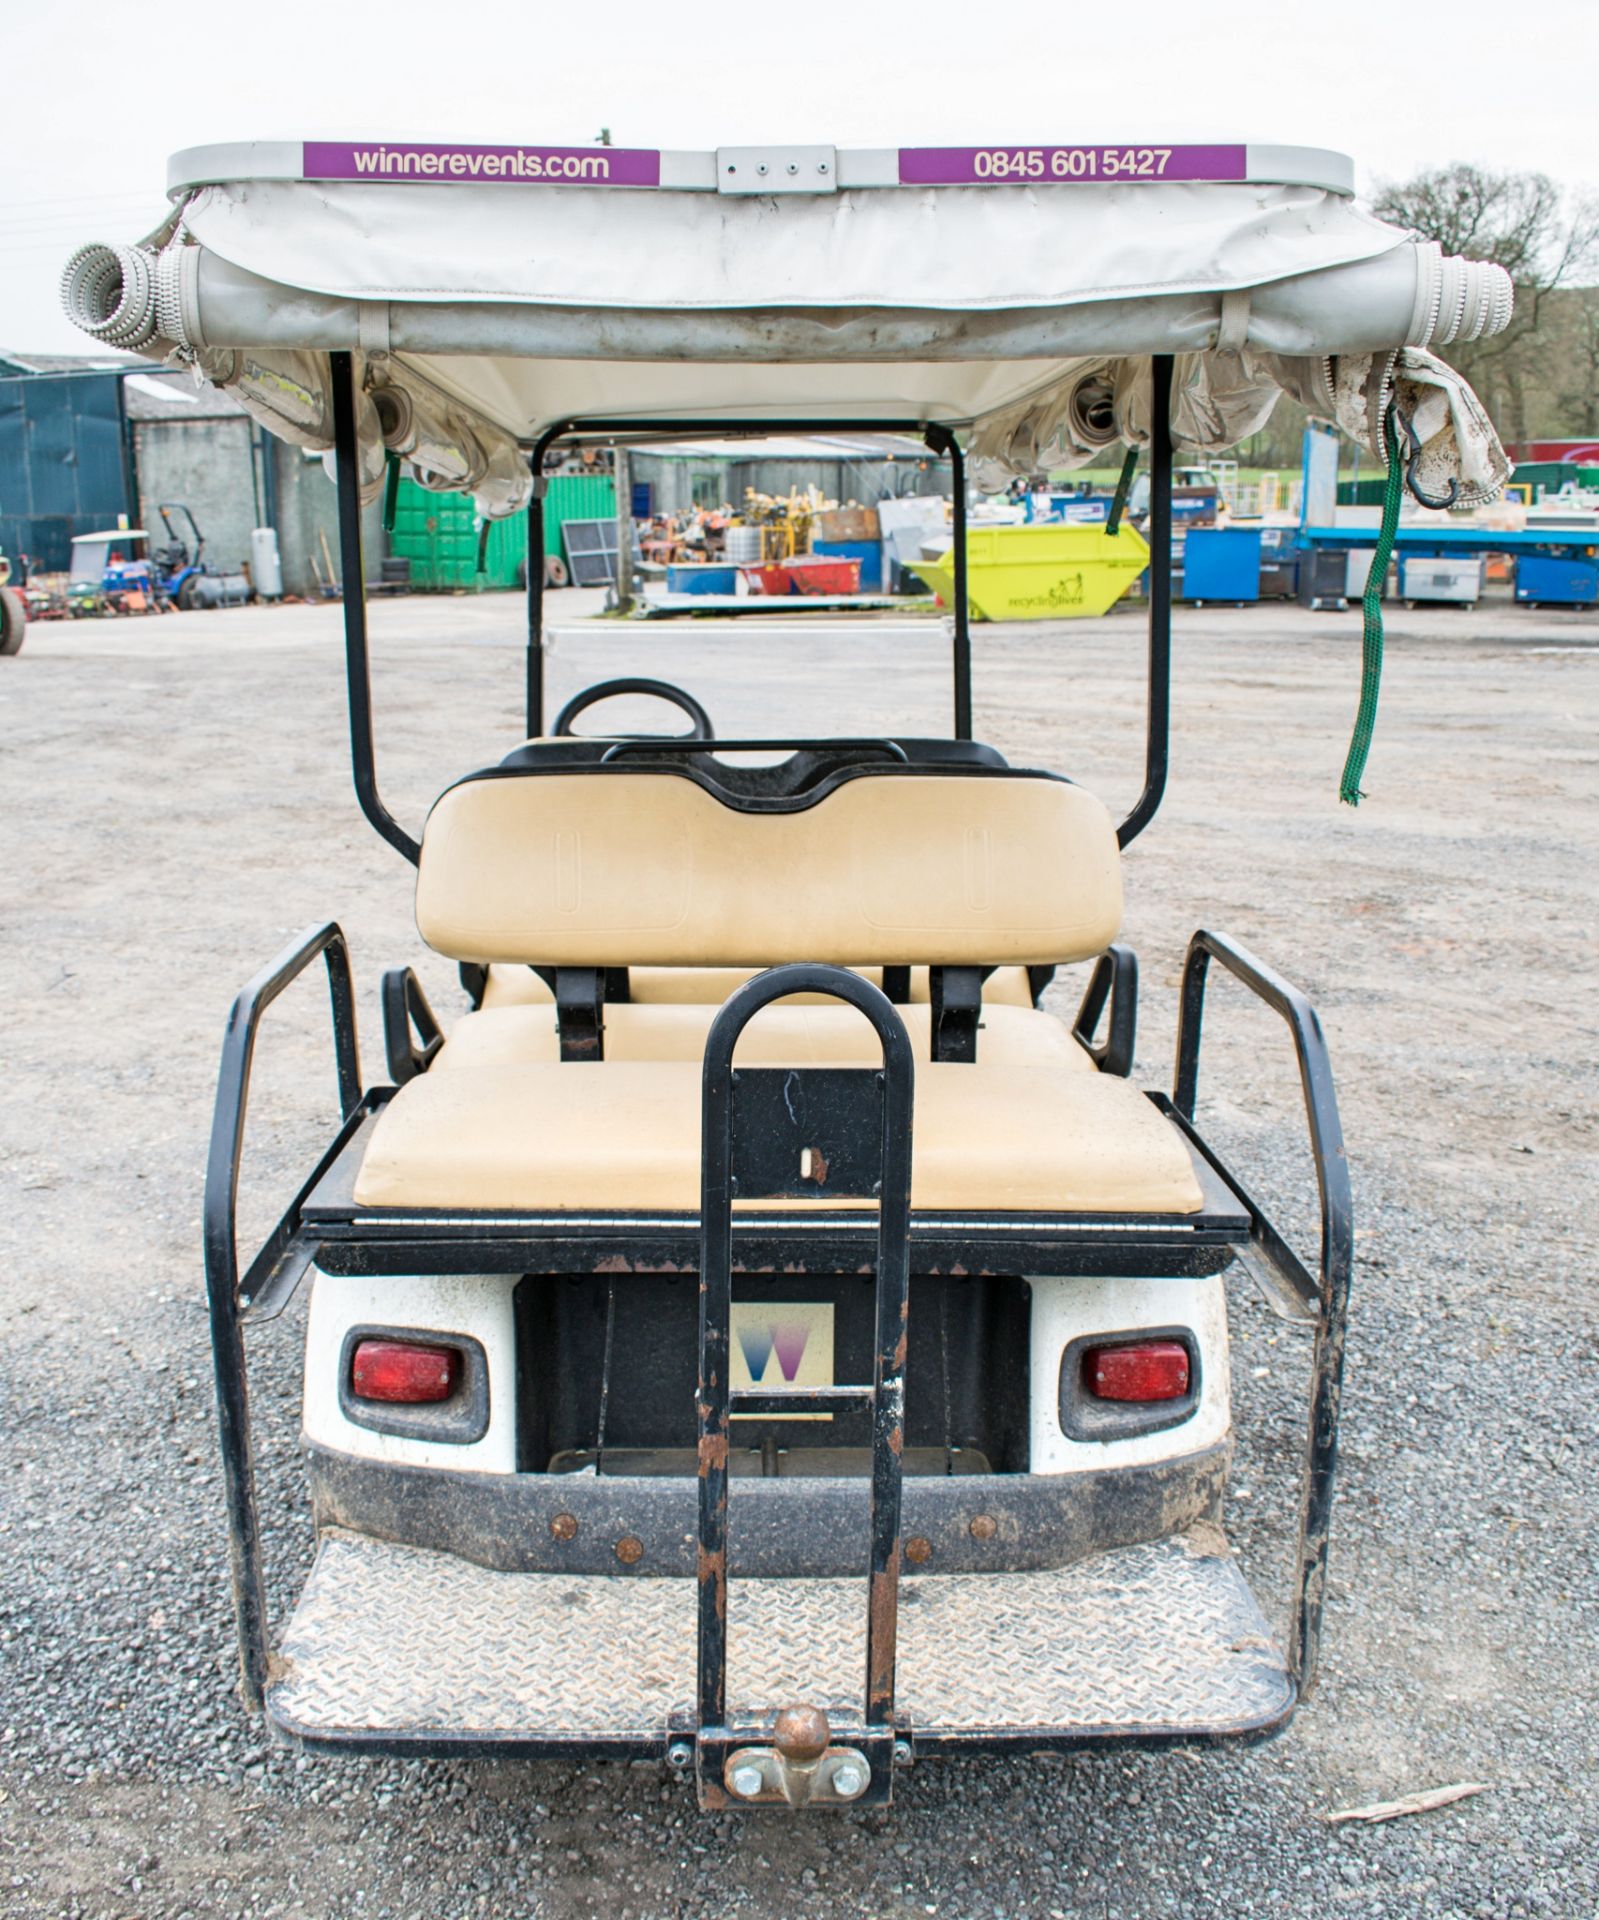 Cushman 6 seat petrol driven golf buggy Year: 2012 S/N: 281245 Recorded Hours: 0184 - Image 6 of 8